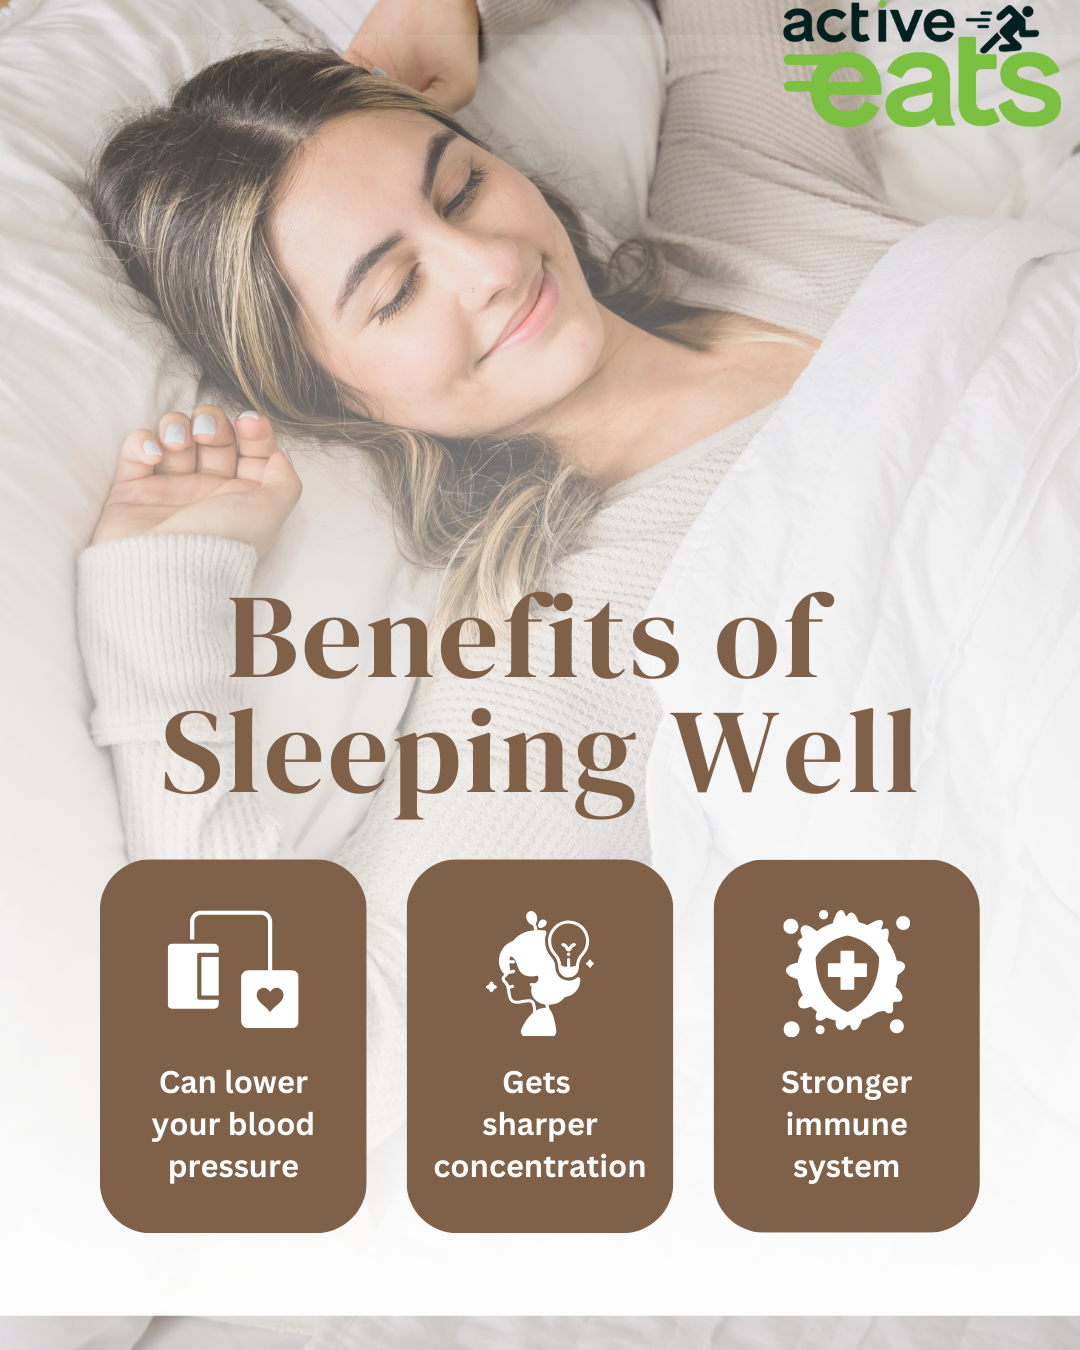 Quality sleep offers numerous benefits, including improved cognitive function, better mood regulation, enhanced immune system function, and a reduced risk of chronic conditions like obesity and heart disease. It promotes physical and mental well-being, aids in memory consolidation, and boosts overall productivity and quality of life.